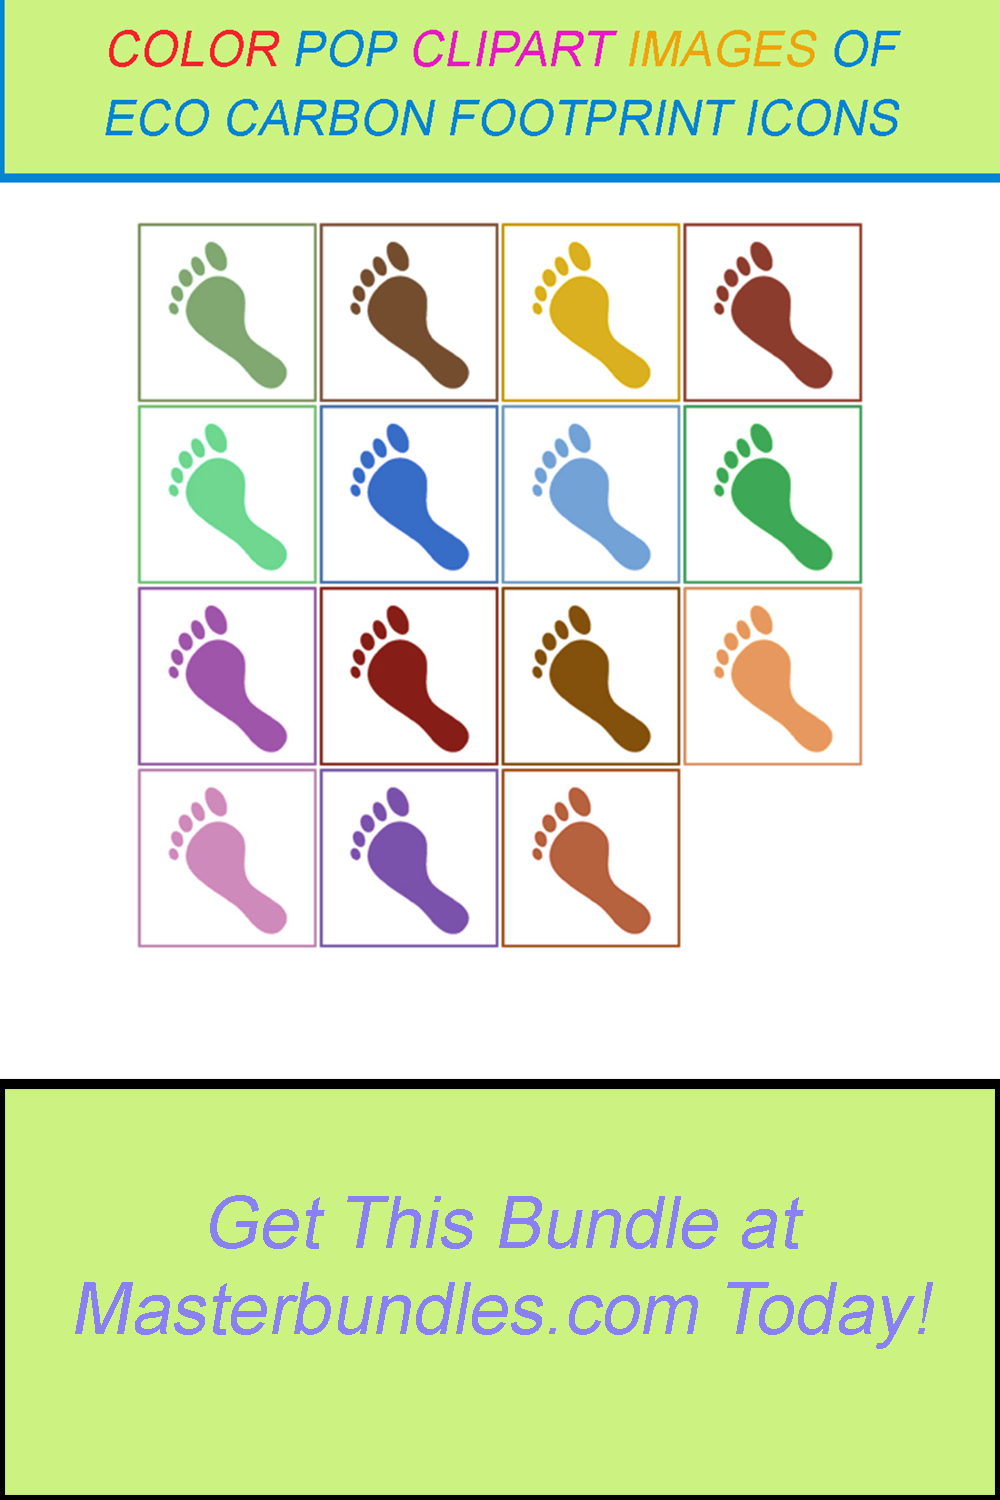 15 COLOR POP CLIPART IMAGES OF ECO CARBON FOOTPRINT ICONS pinterest preview image.